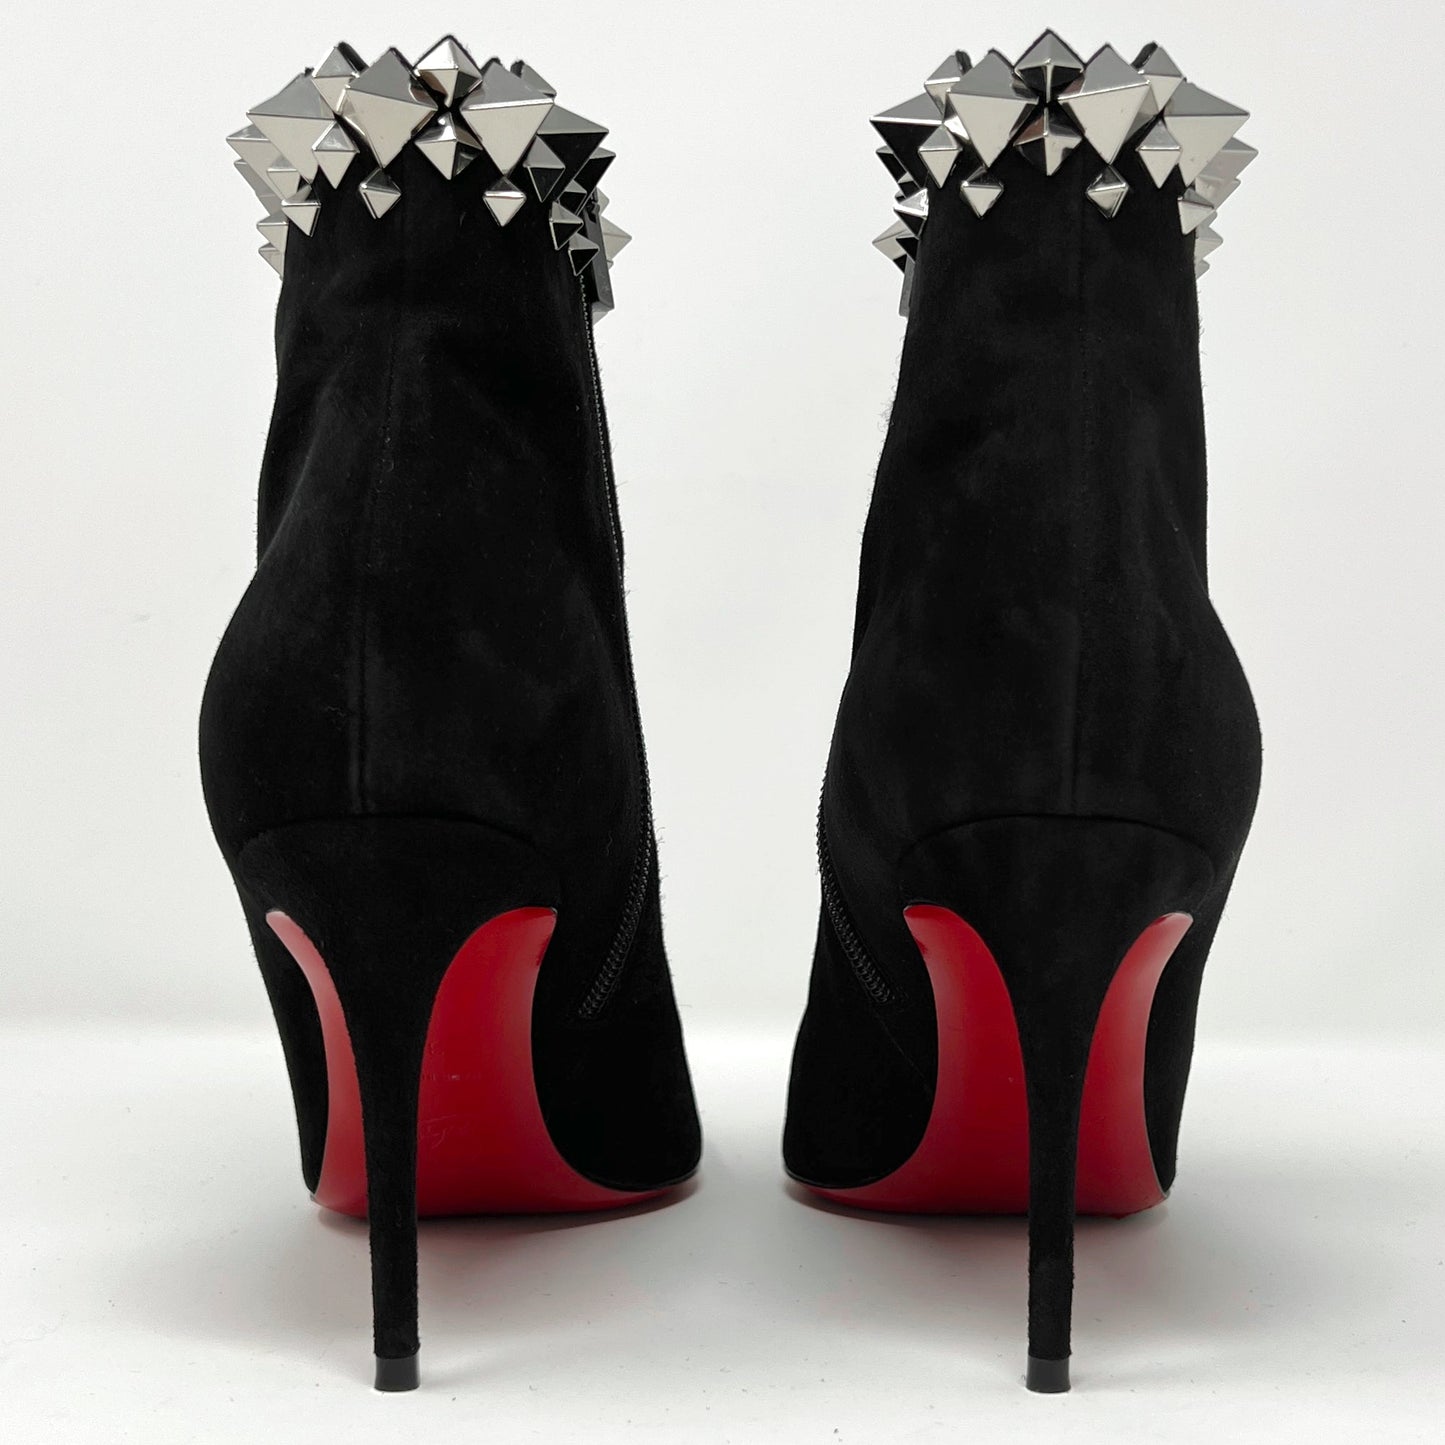 Christian Louboutin Firmamma Black Suede Silver Spike Studded Ankle Boots Size EU 39